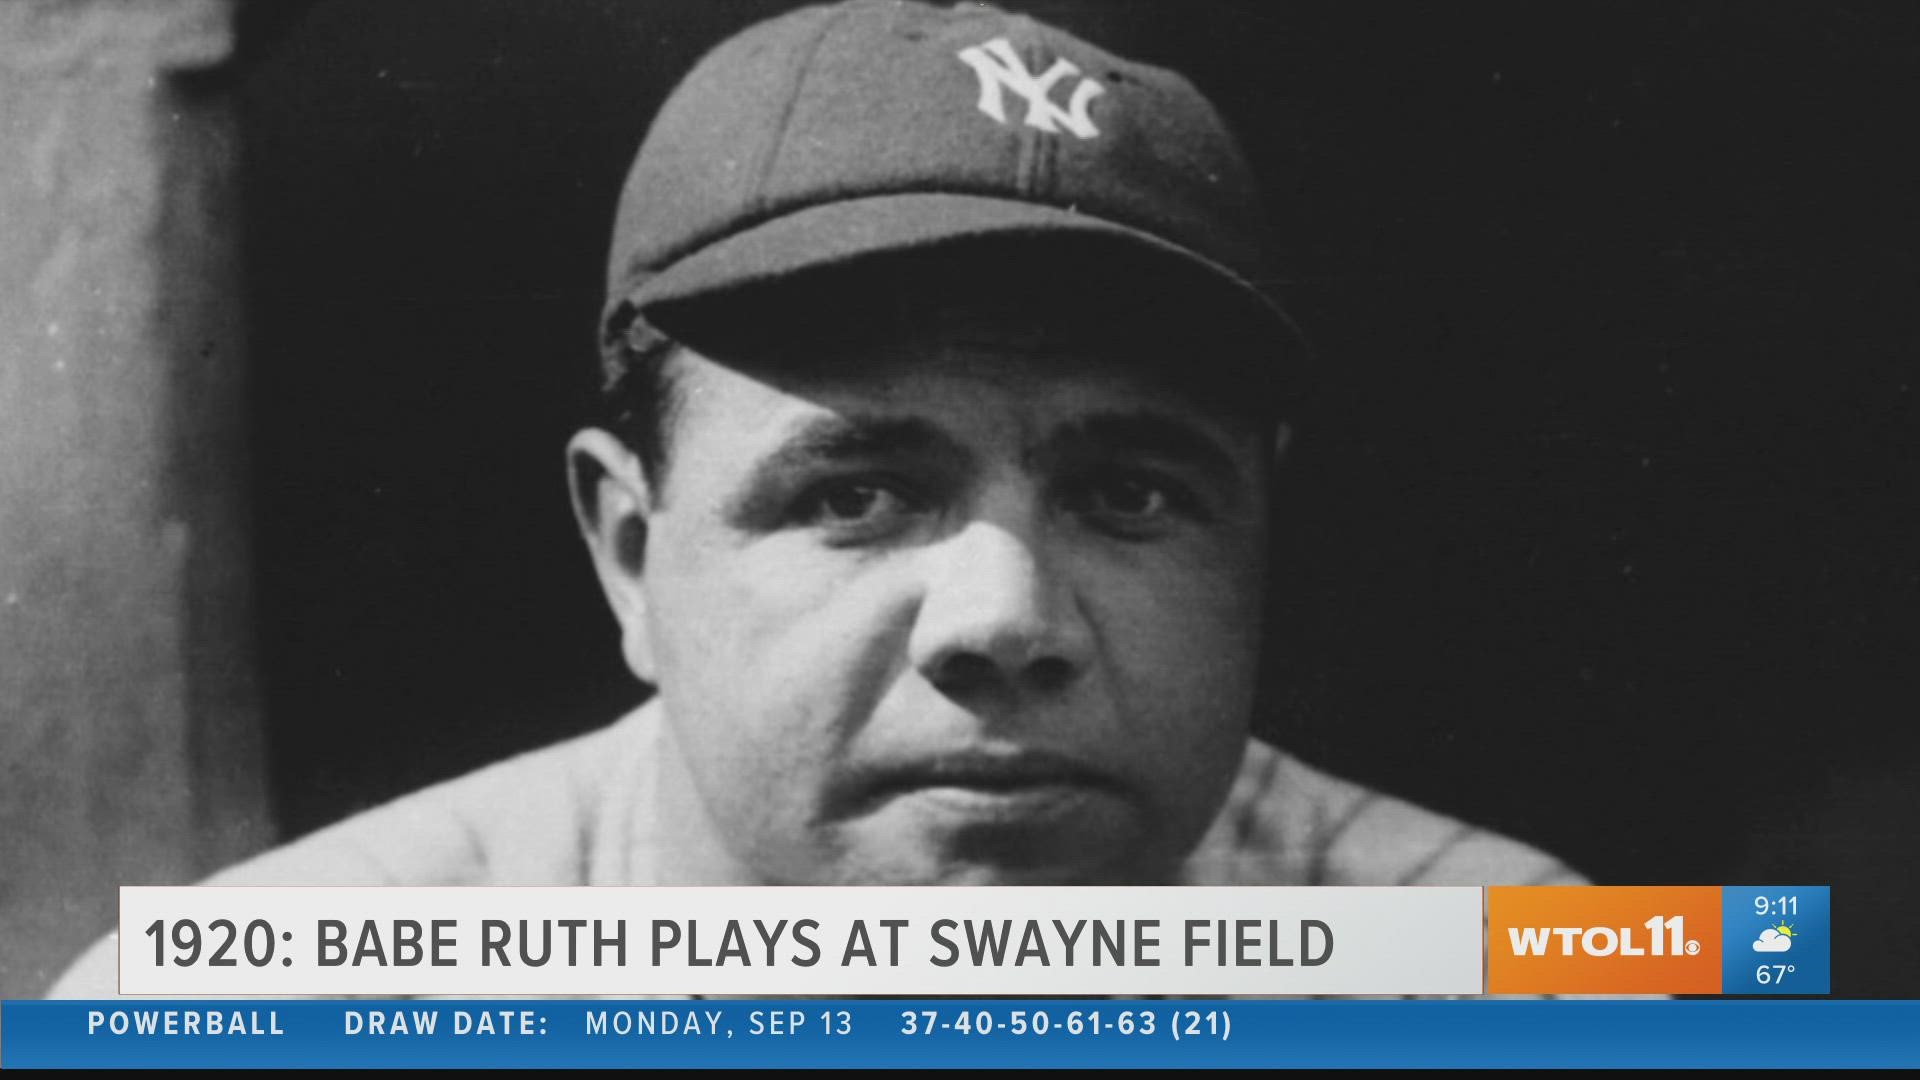 In 1920, baseball legend Babe Ruth plays an exhibition game at Swayne Field.